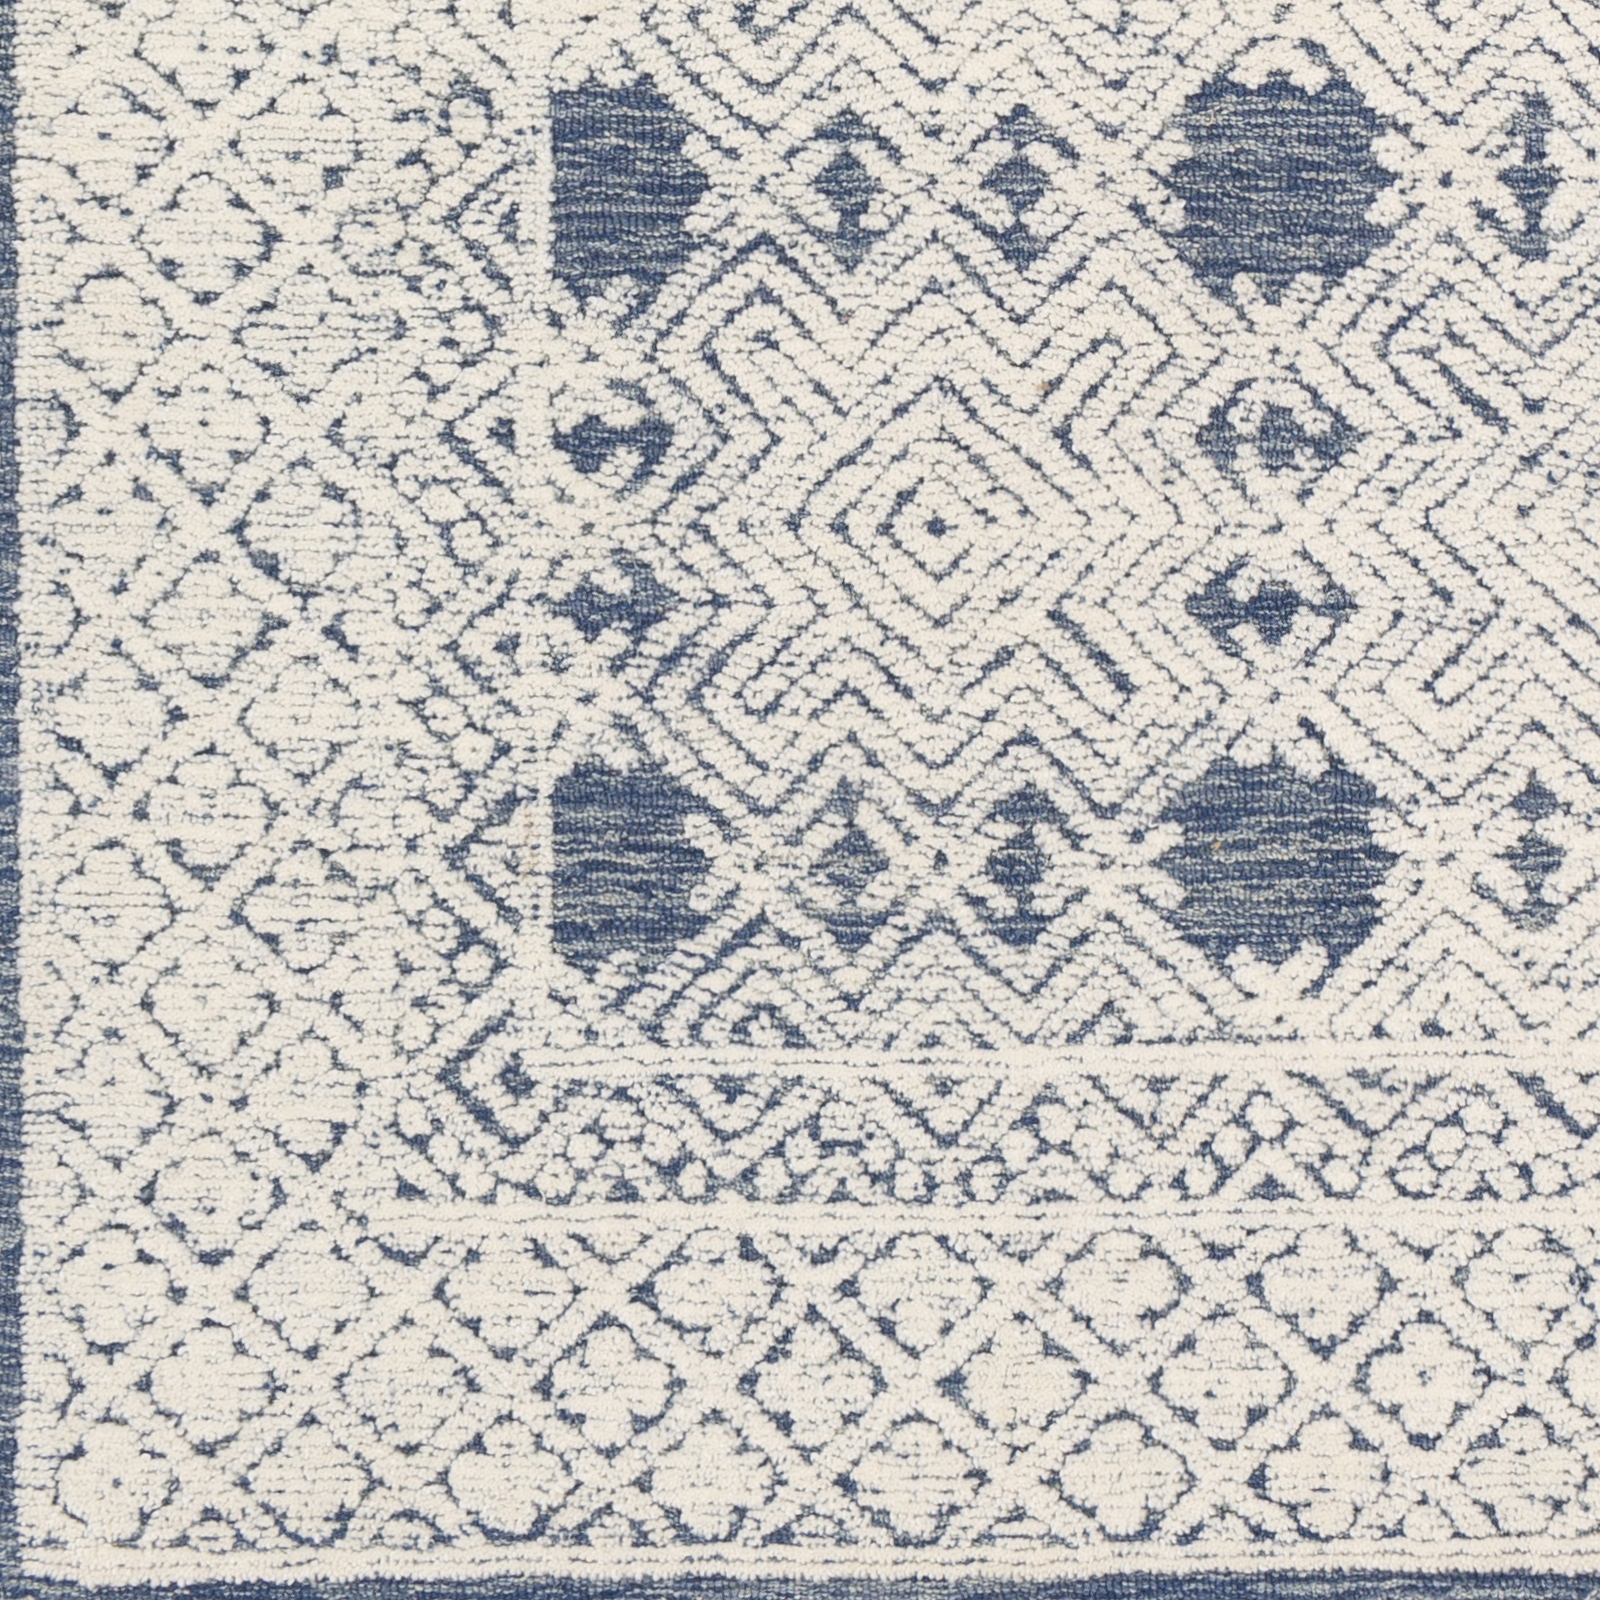 Louvre Rug, 6' x 9' - Image 5